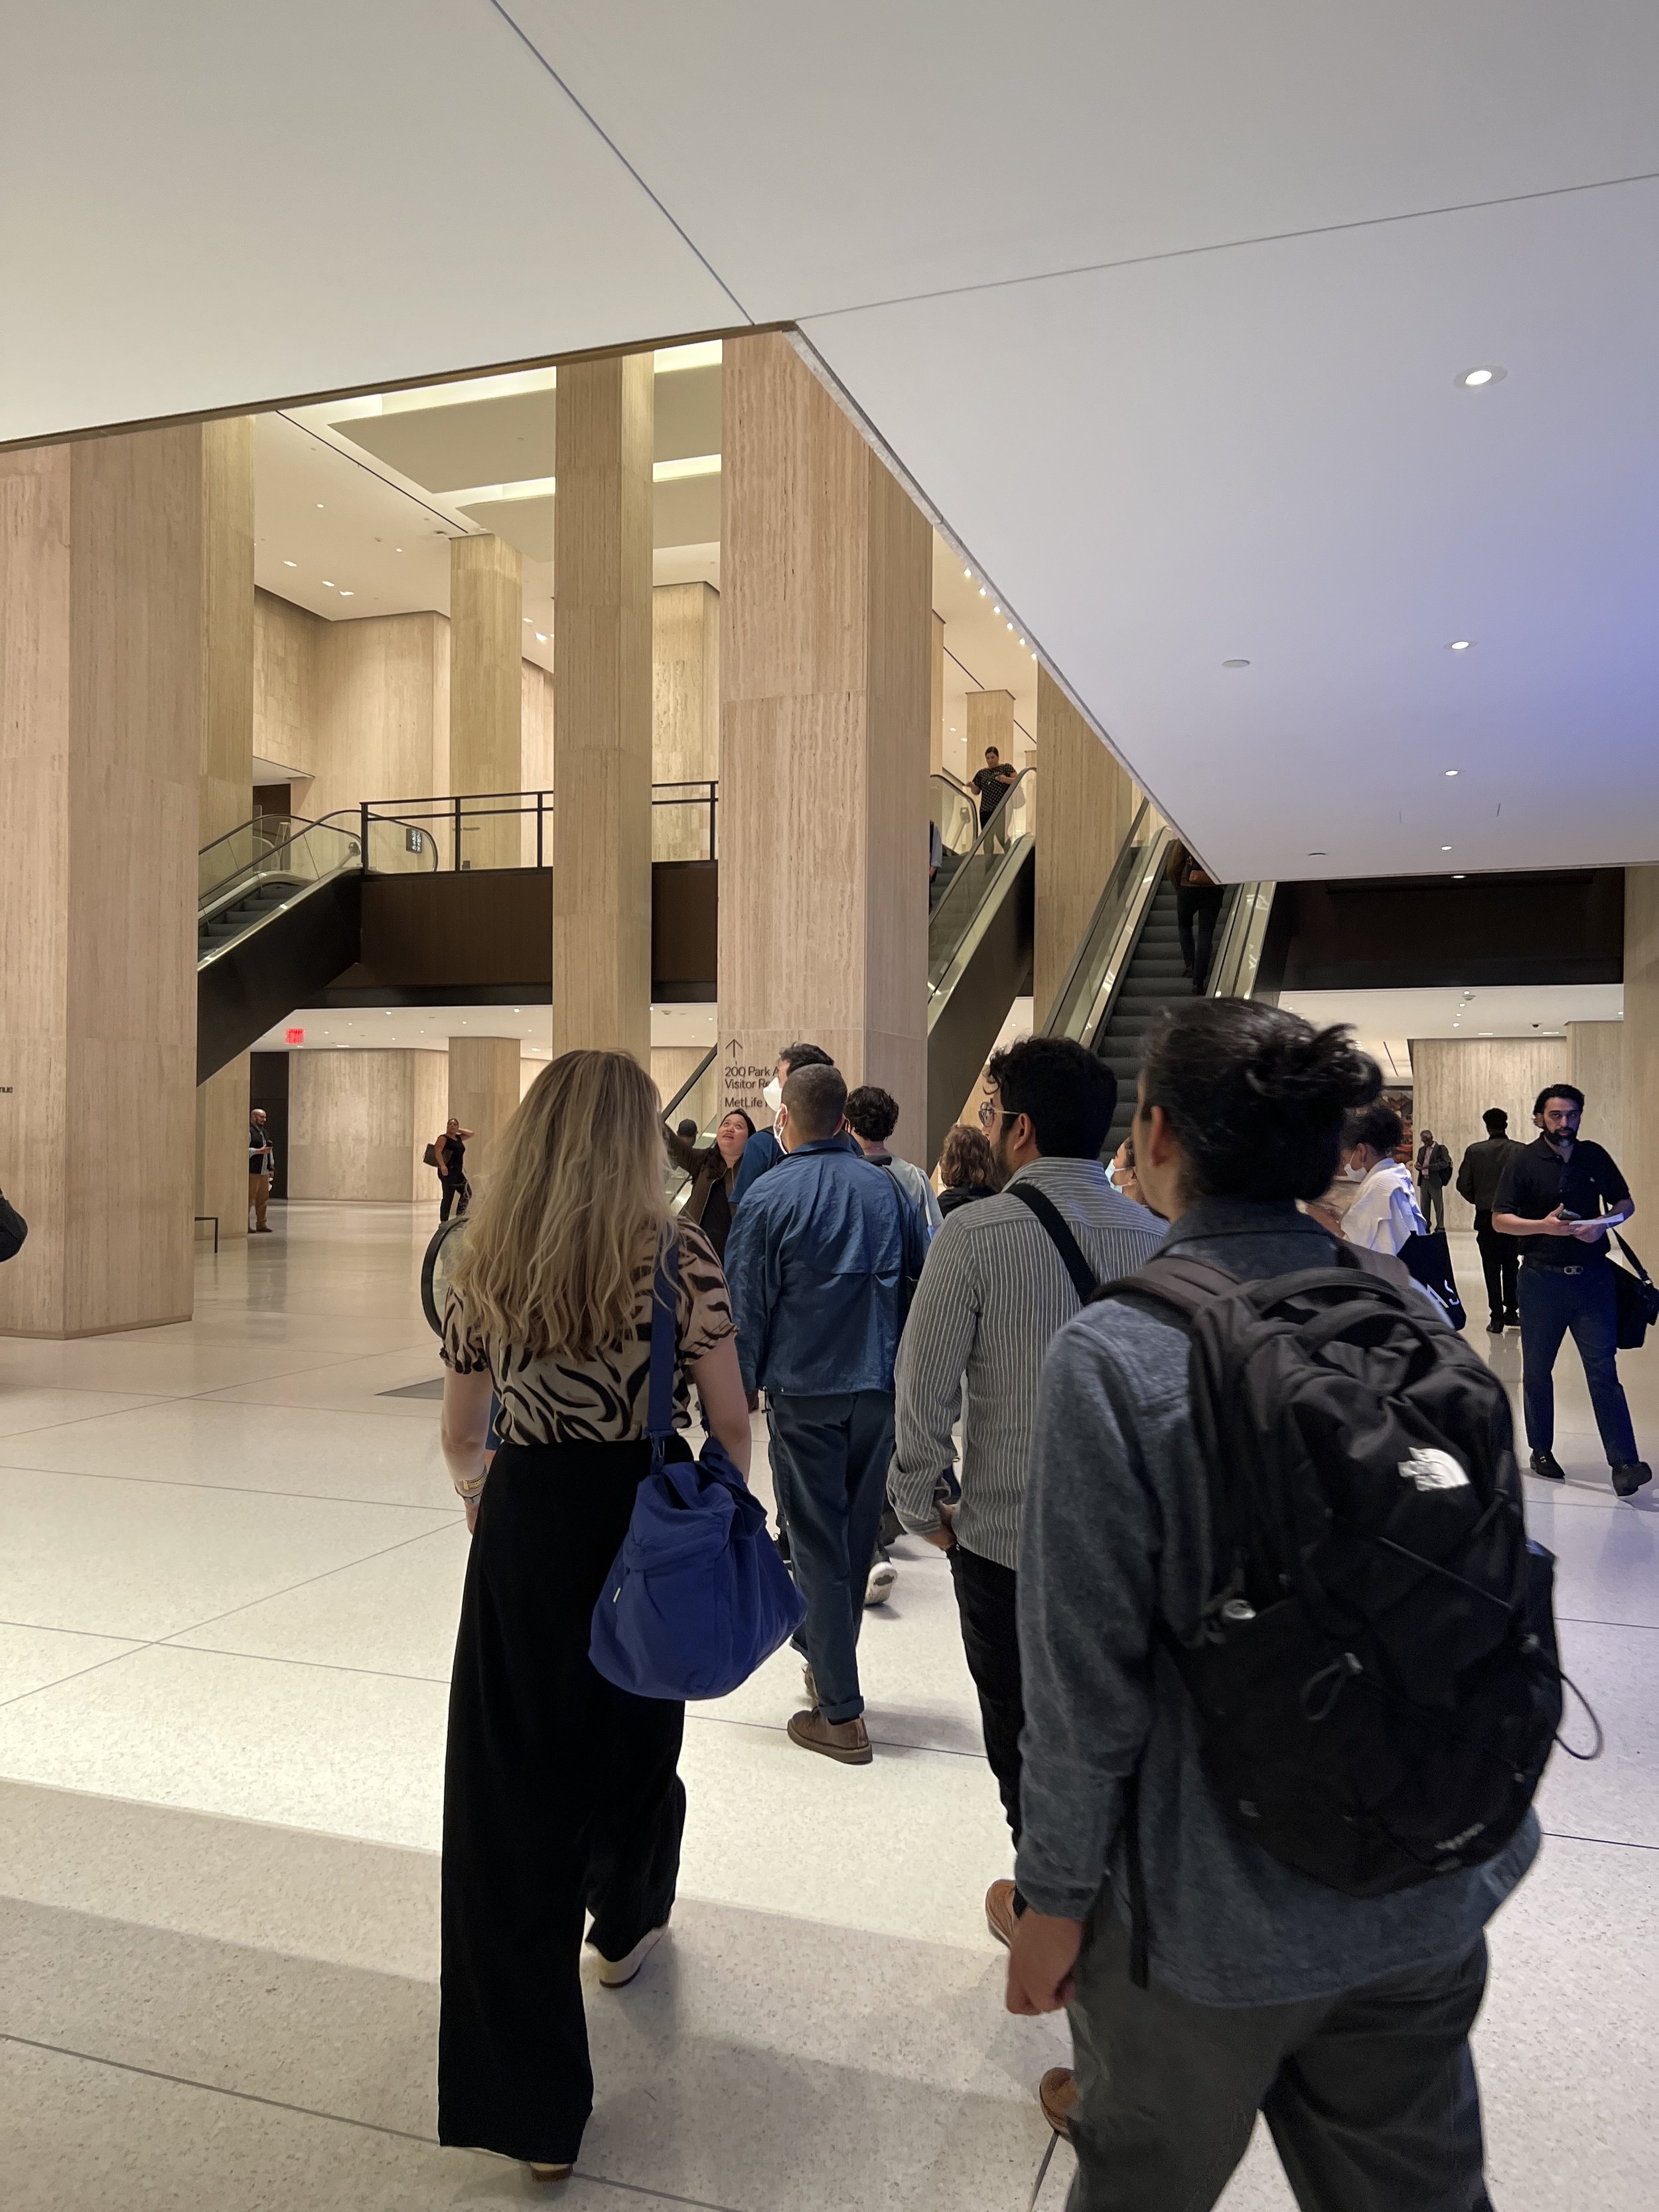  Seen here coming from Grand Central Station, MdeAS reorganized 200 Park Avenue’s ground floor concourse and mezzanine levels to create intuitive circulation and eliminate congestion. 